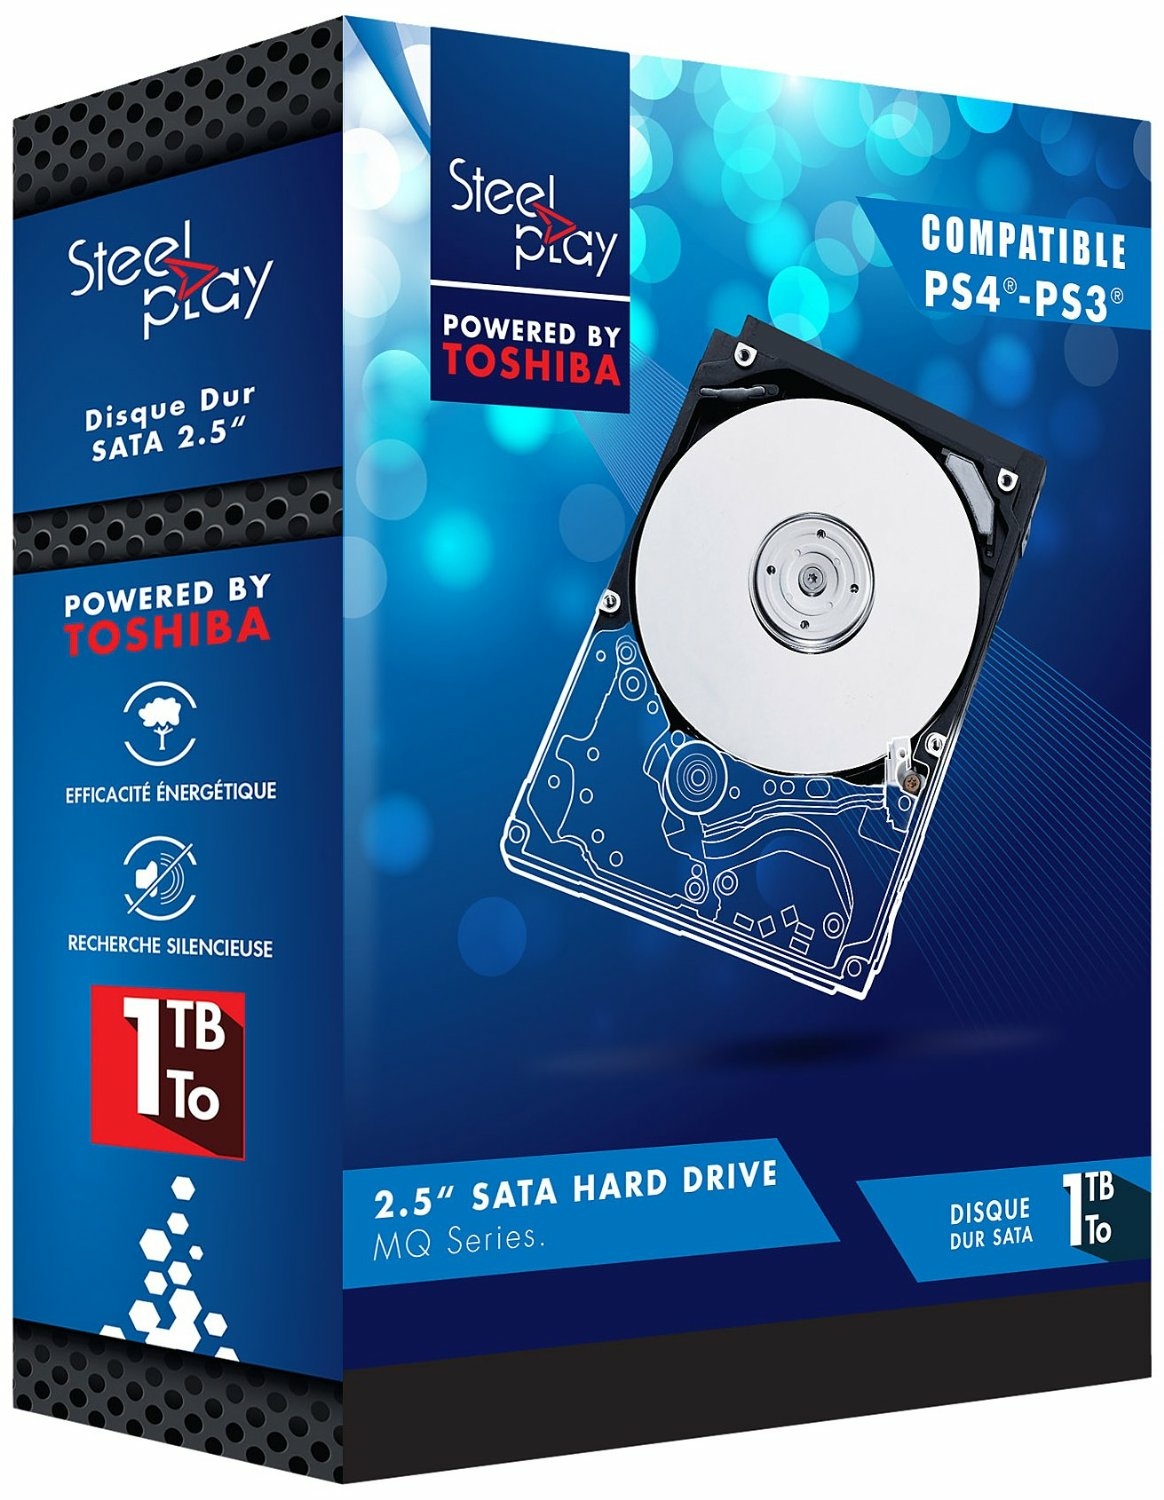 Disque dur 1 To - SteelPlay - PS4 - PS3